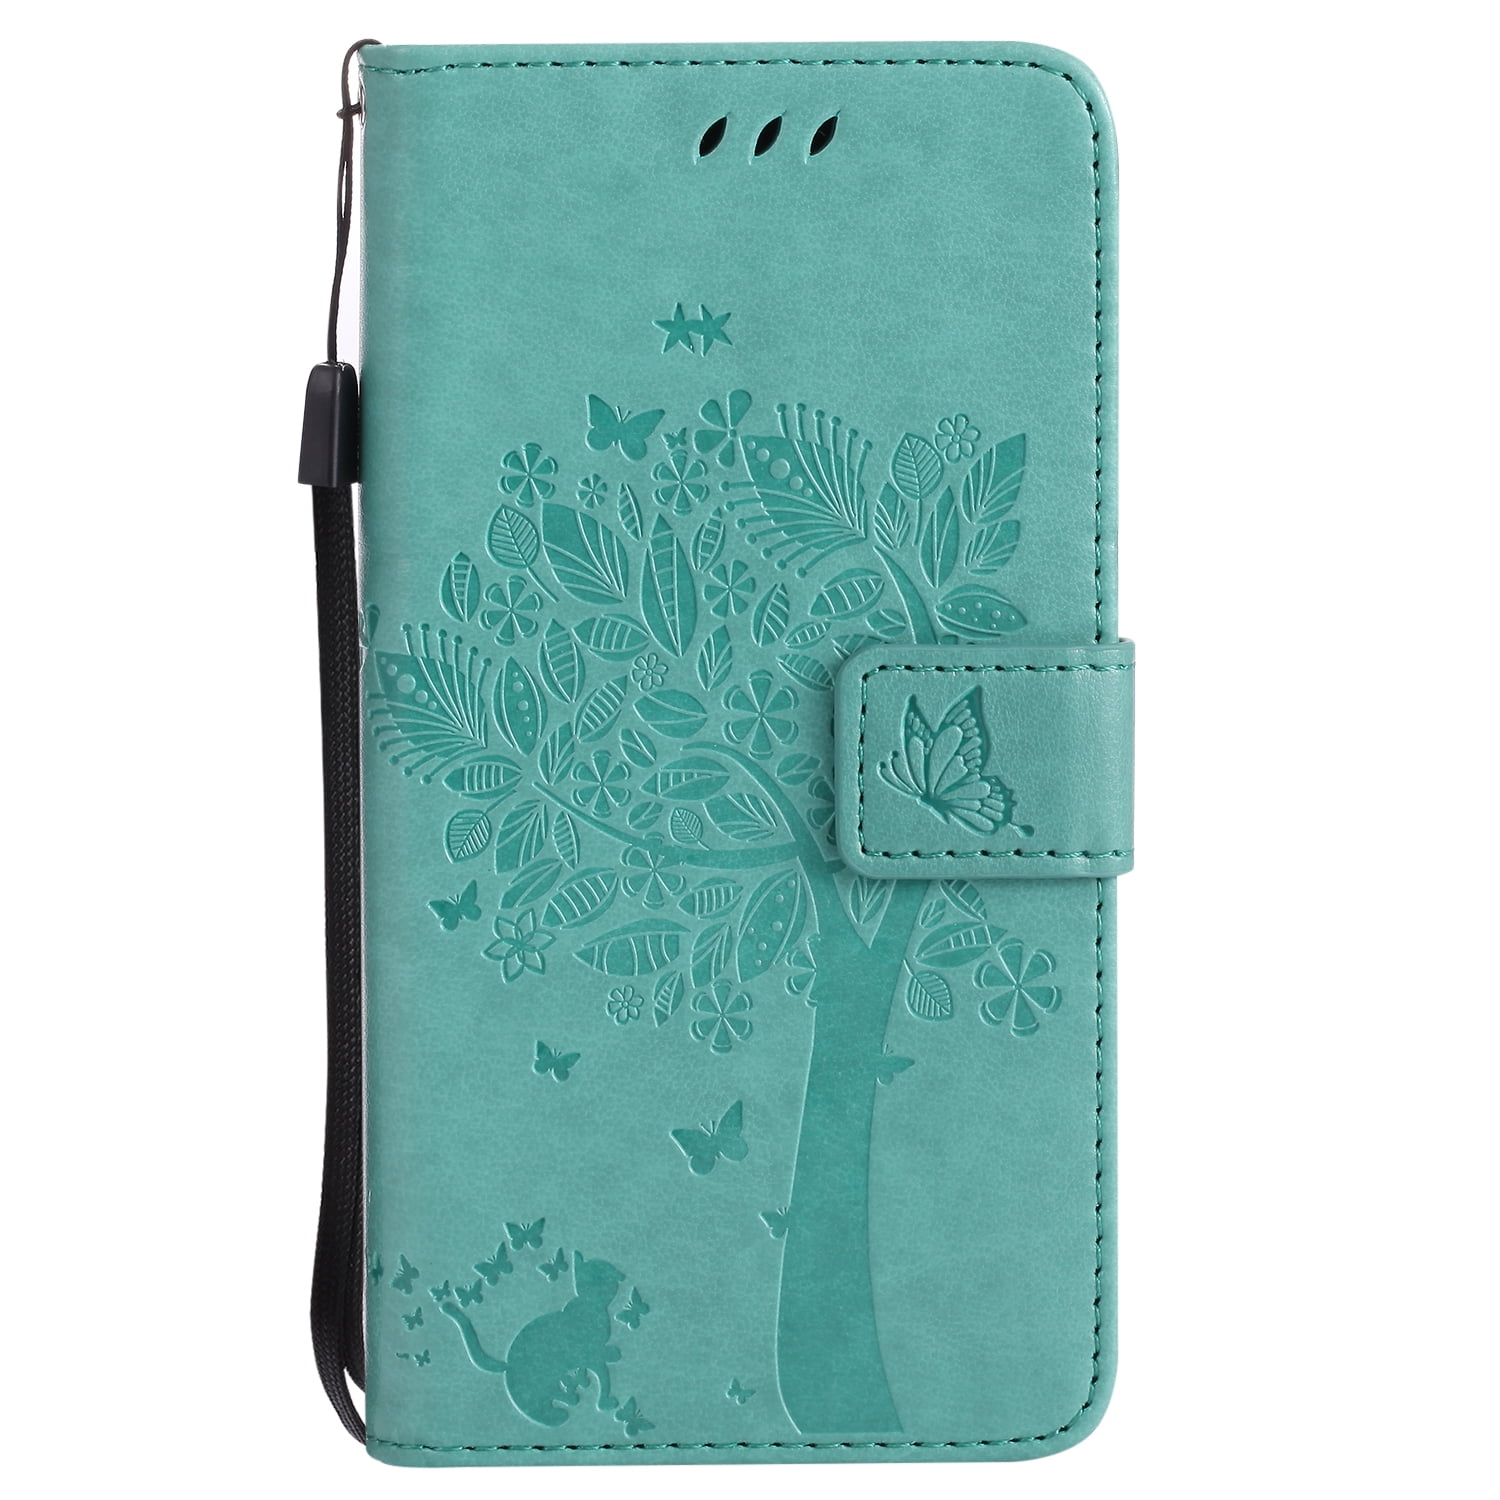 voorzien nieuws royalty Samsung Galaxy J5 Case 2017 (Not for J5 Prime), Allytech [Embossed Cat &  Tree] PU Leather Wallet Case Folio Flip Kickstand Cover with Card Slots for Samsung  Galaxy J5 2017 Release, Green -